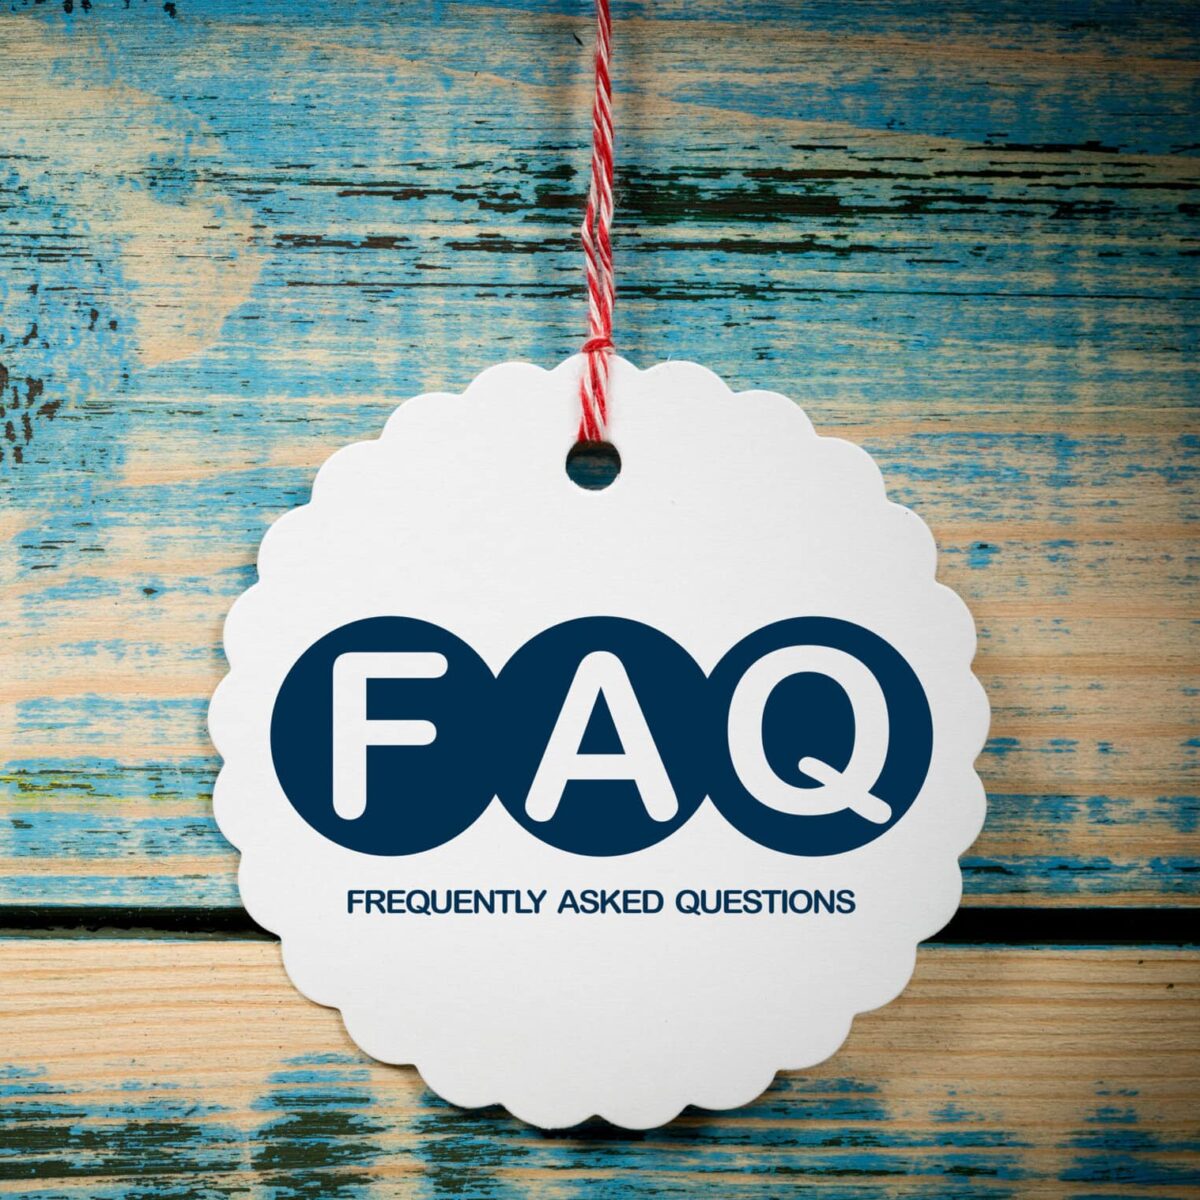 FAQ - frequently asked questions